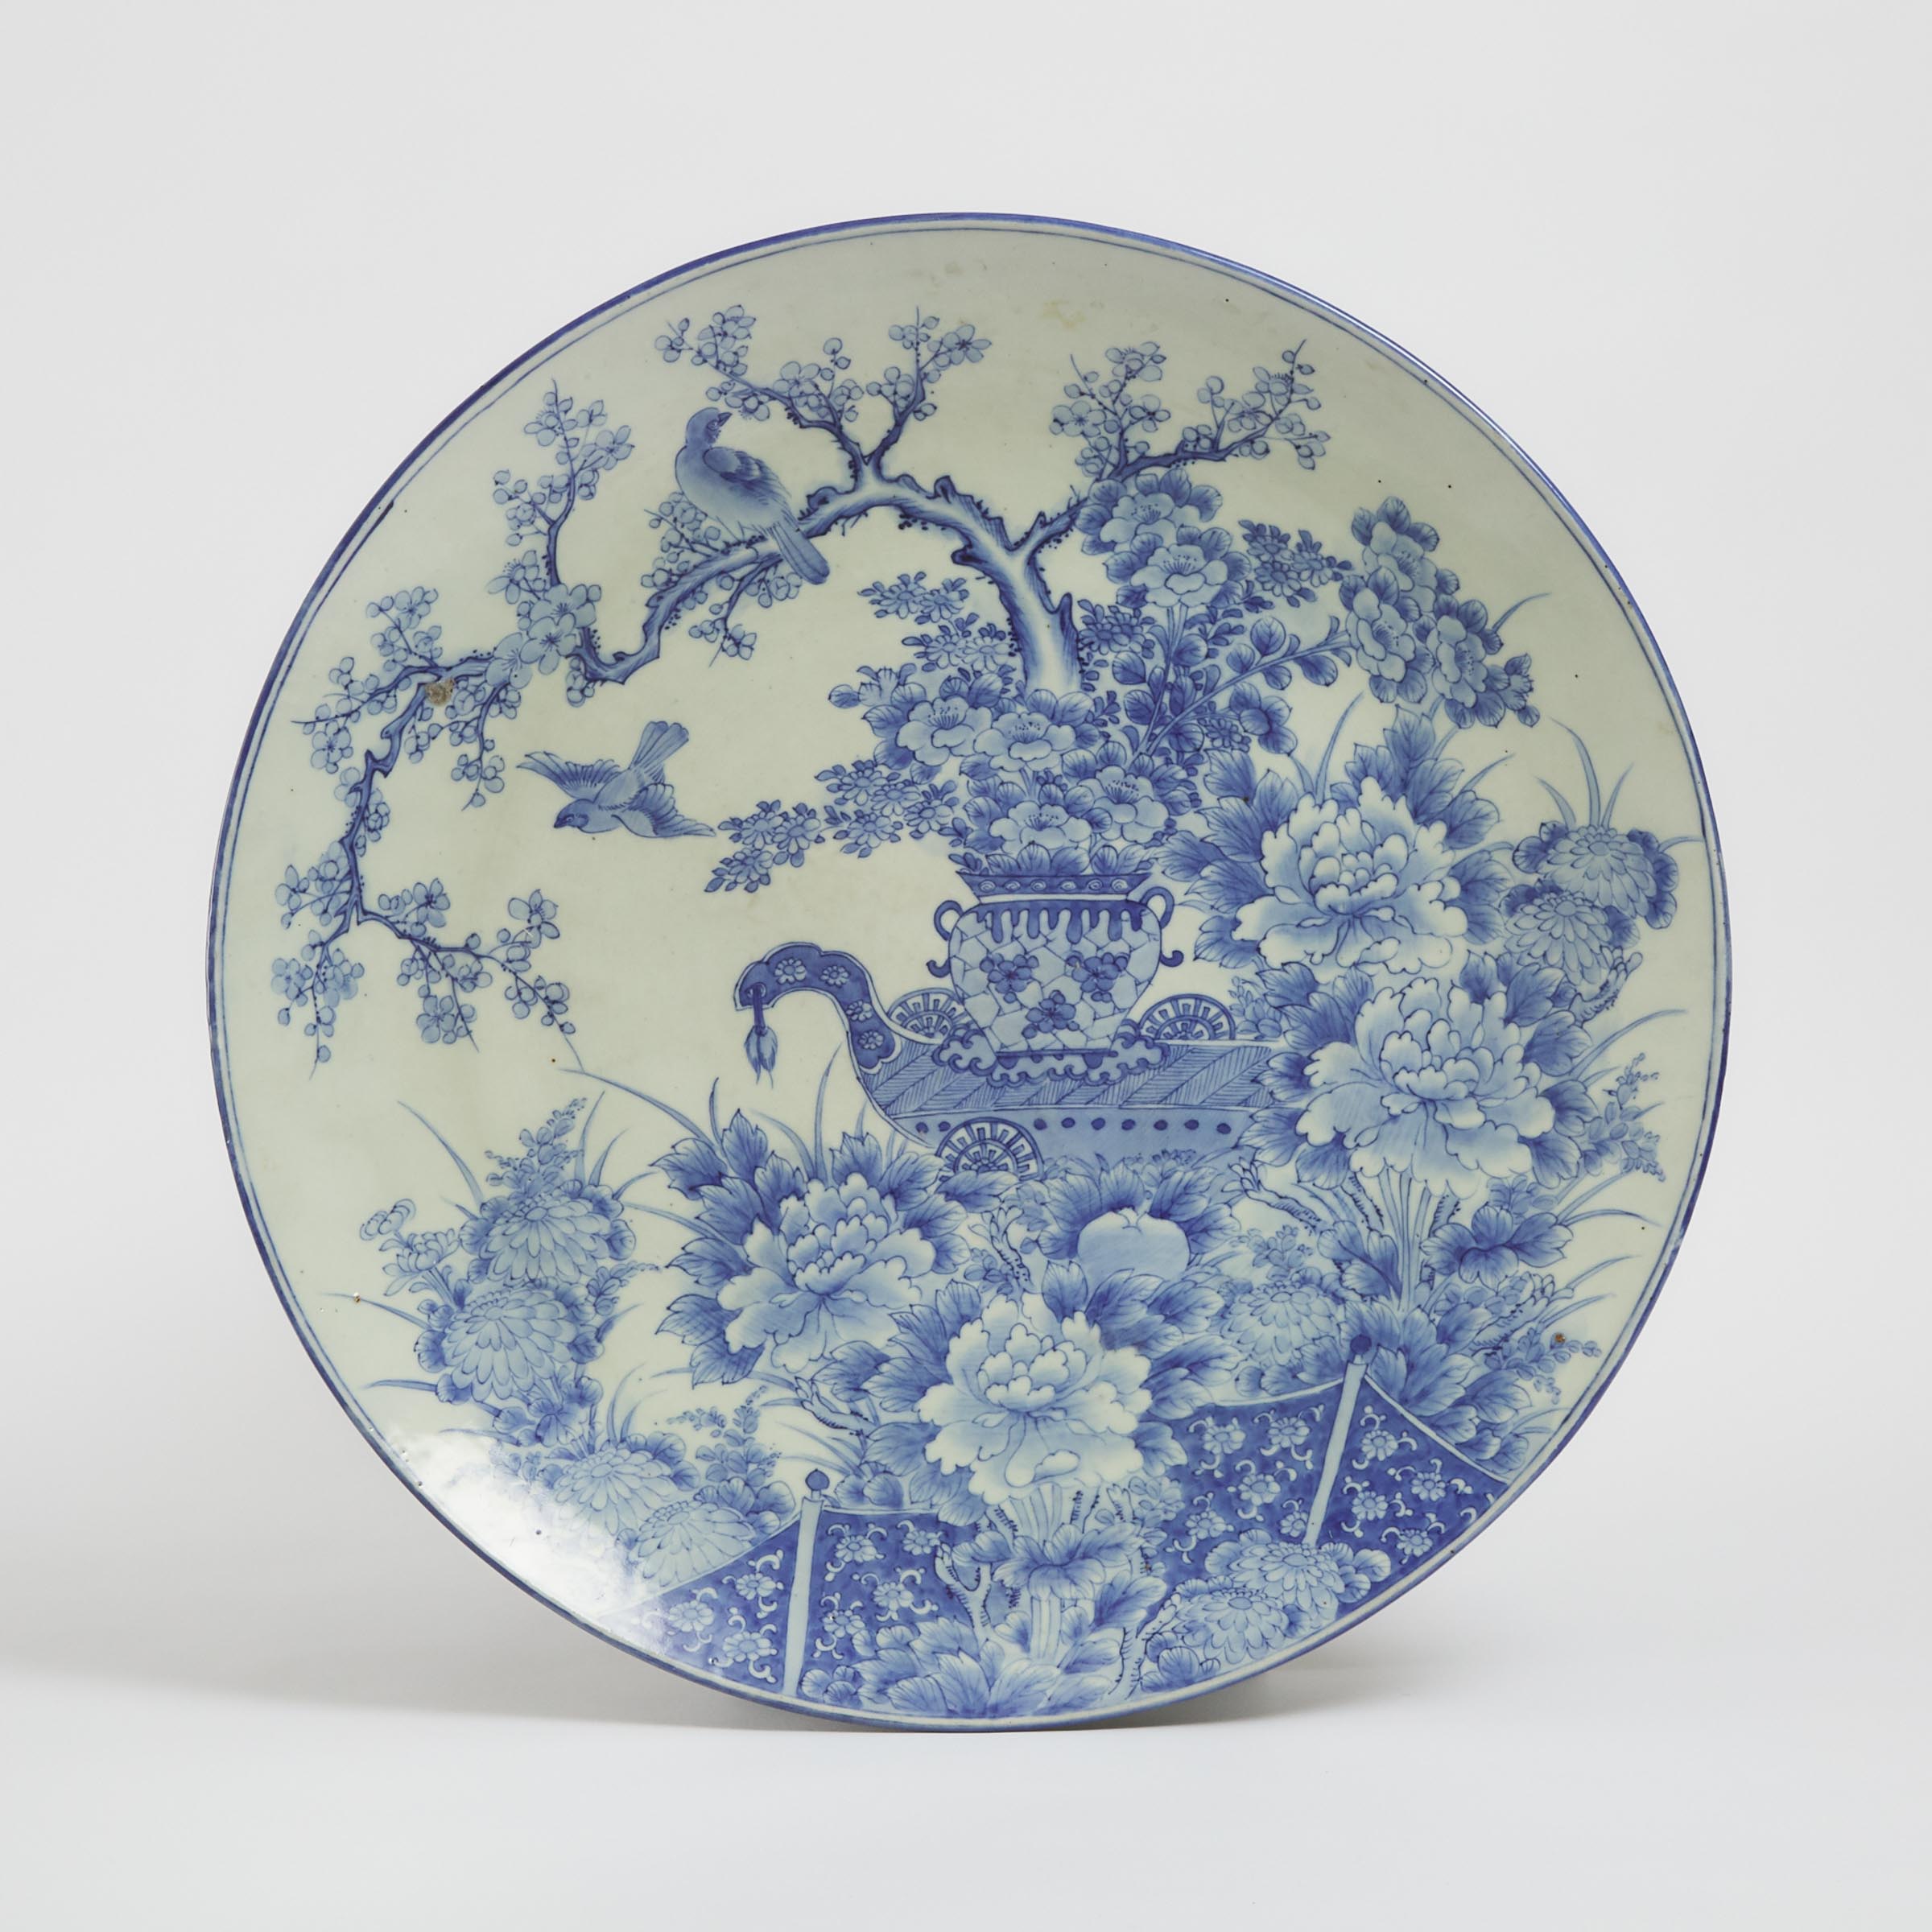 A Large Japanese Arita Blue and White Circular Charger, Meiji Period, 19th Century